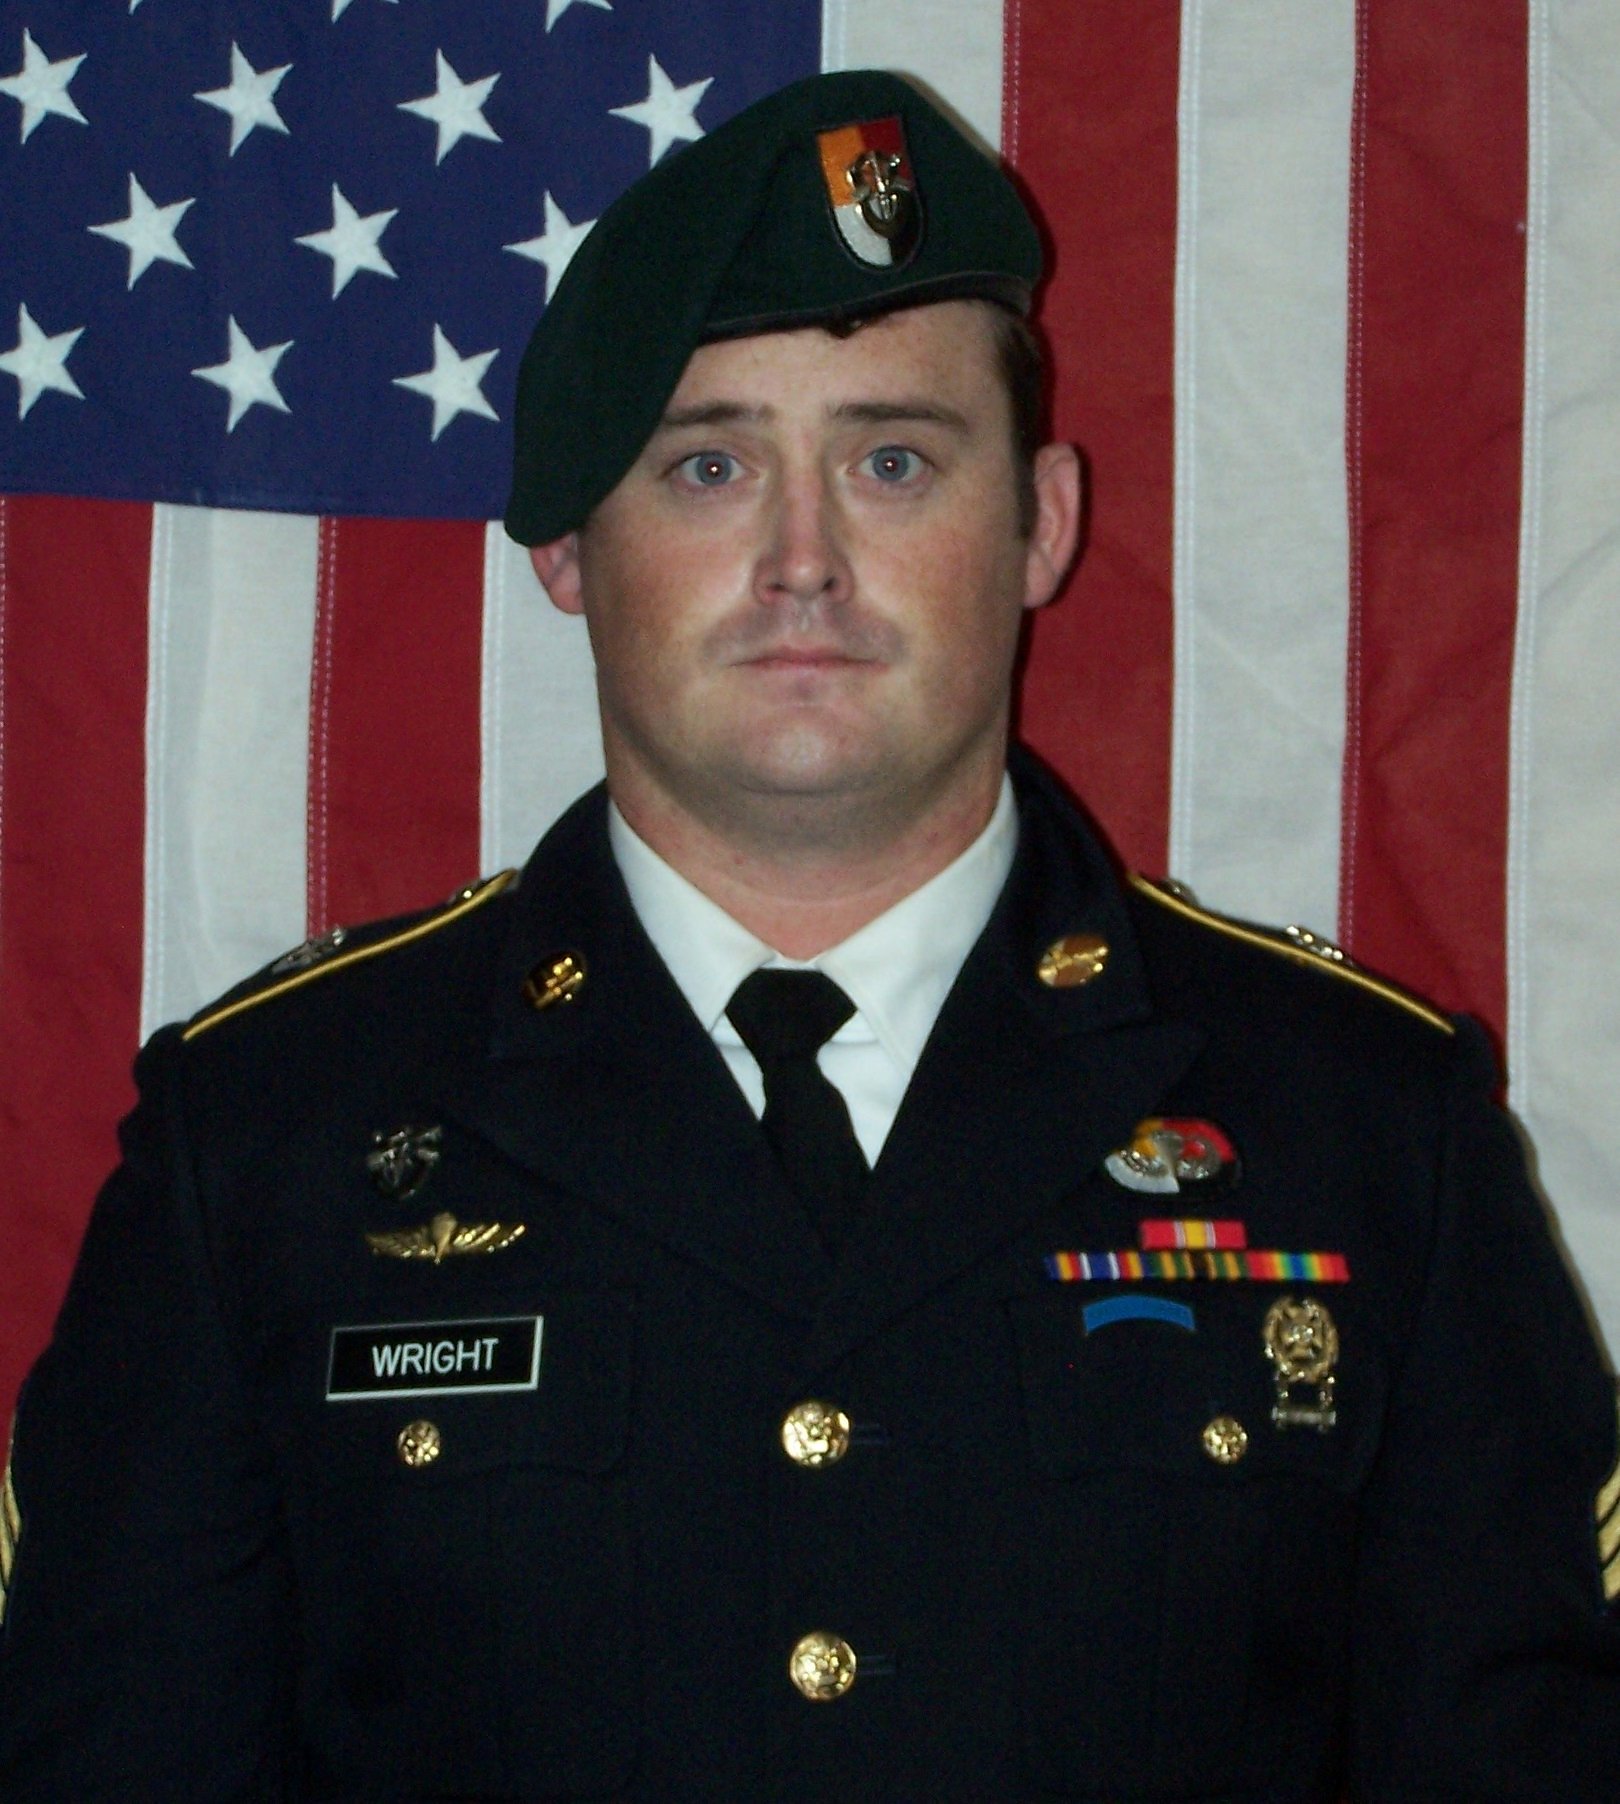 U.S. Army special forces Sgt Dustin Wright poses in an official photo